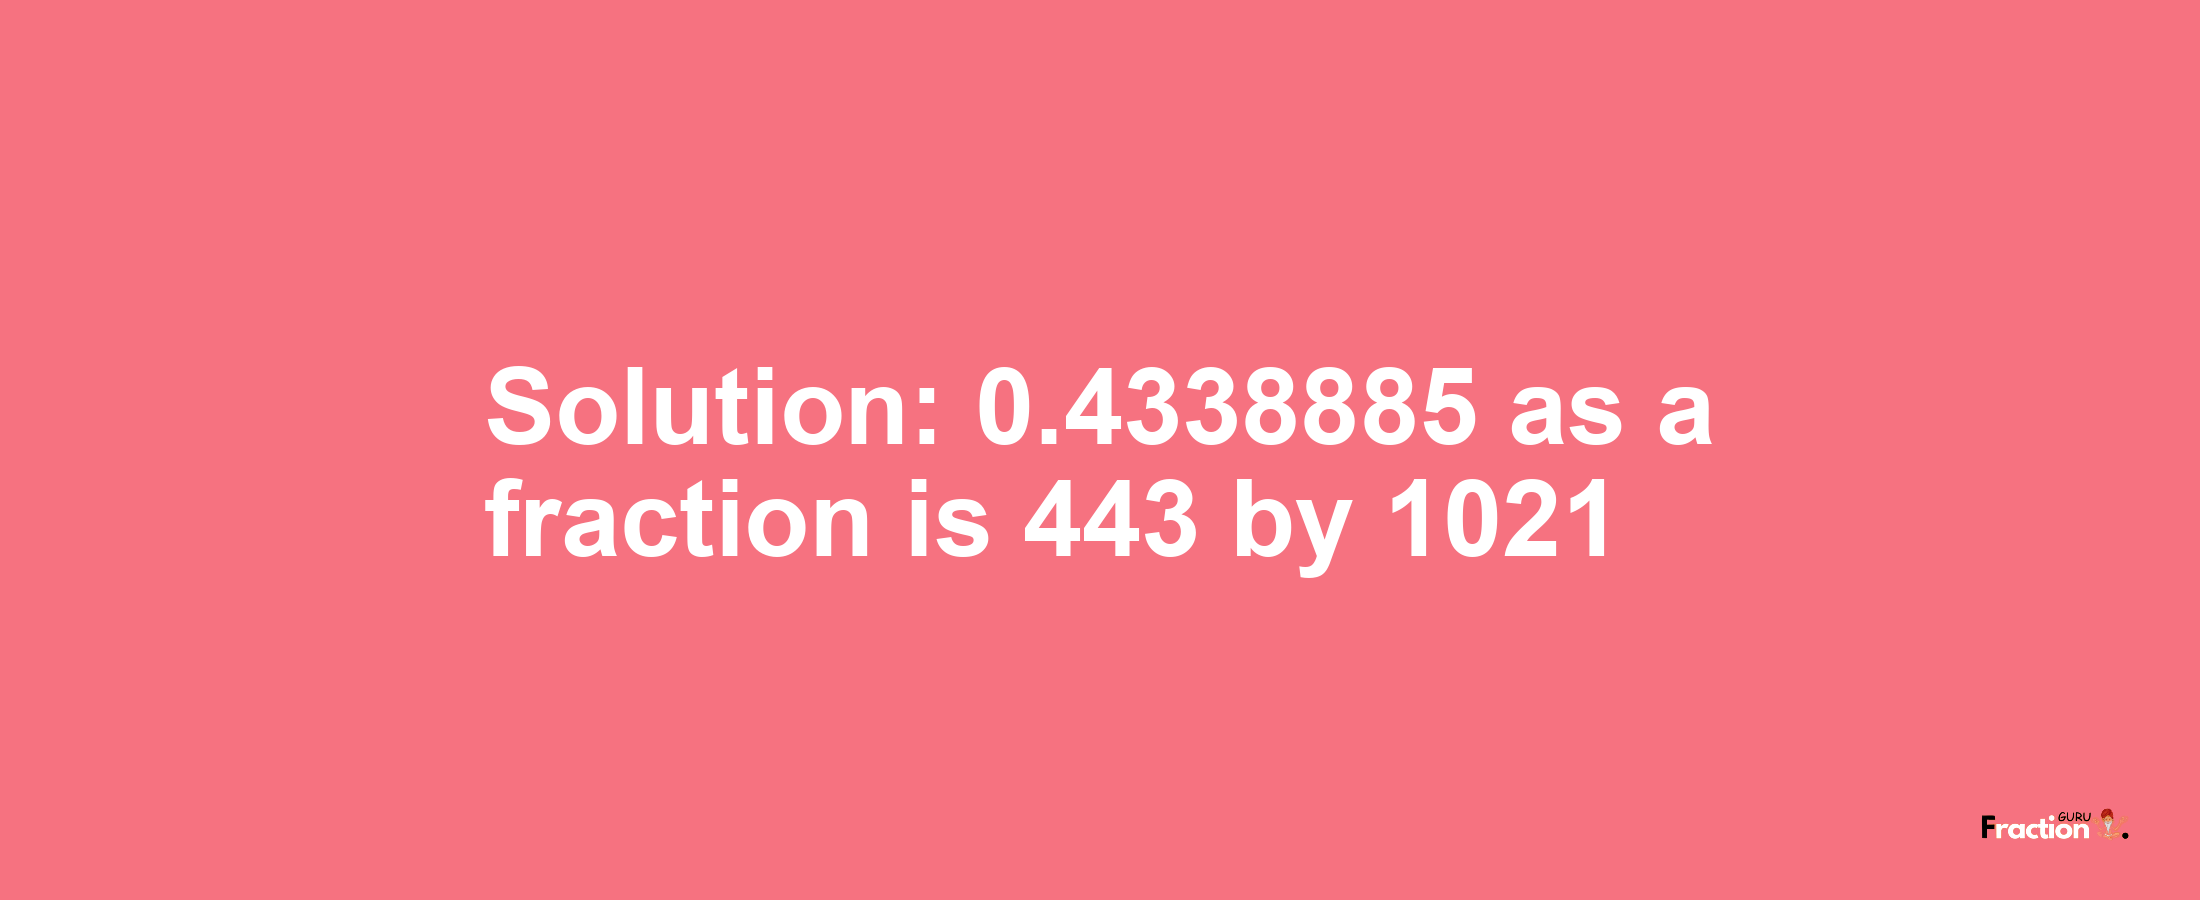 Solution:0.4338885 as a fraction is 443/1021